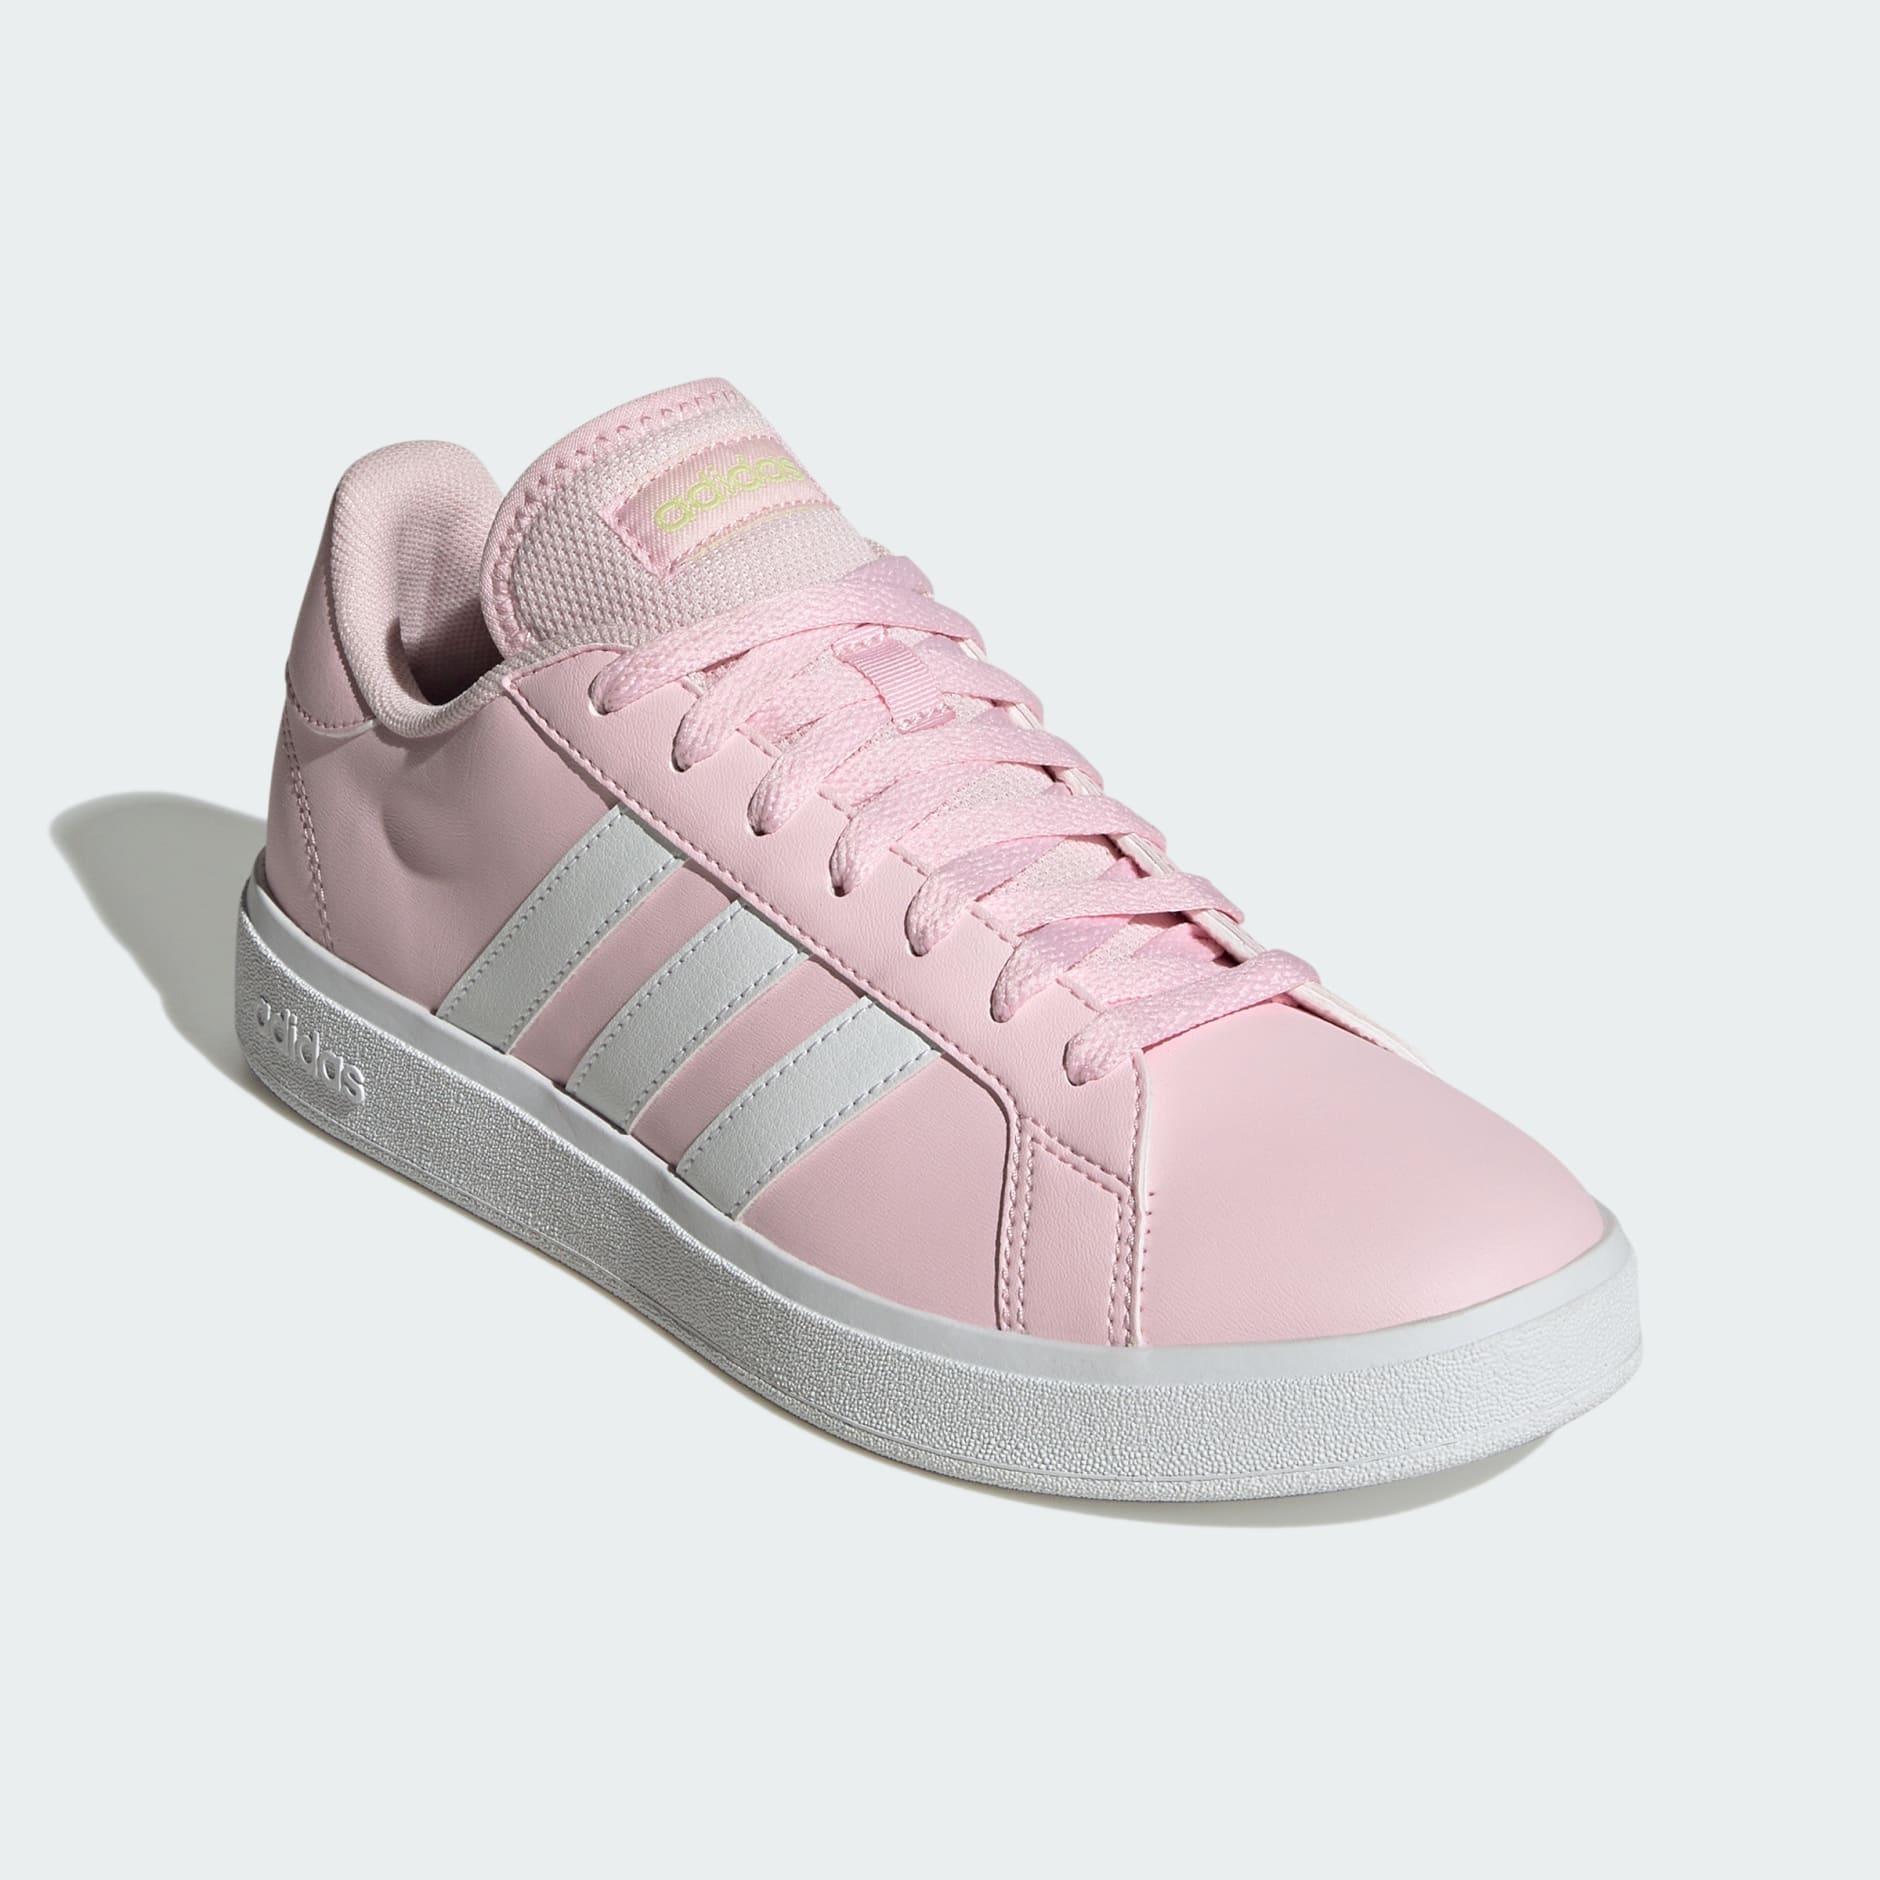 Shoes - Grand Court TD Lifestyle Court Casual Shoes - Pink | adidas ...